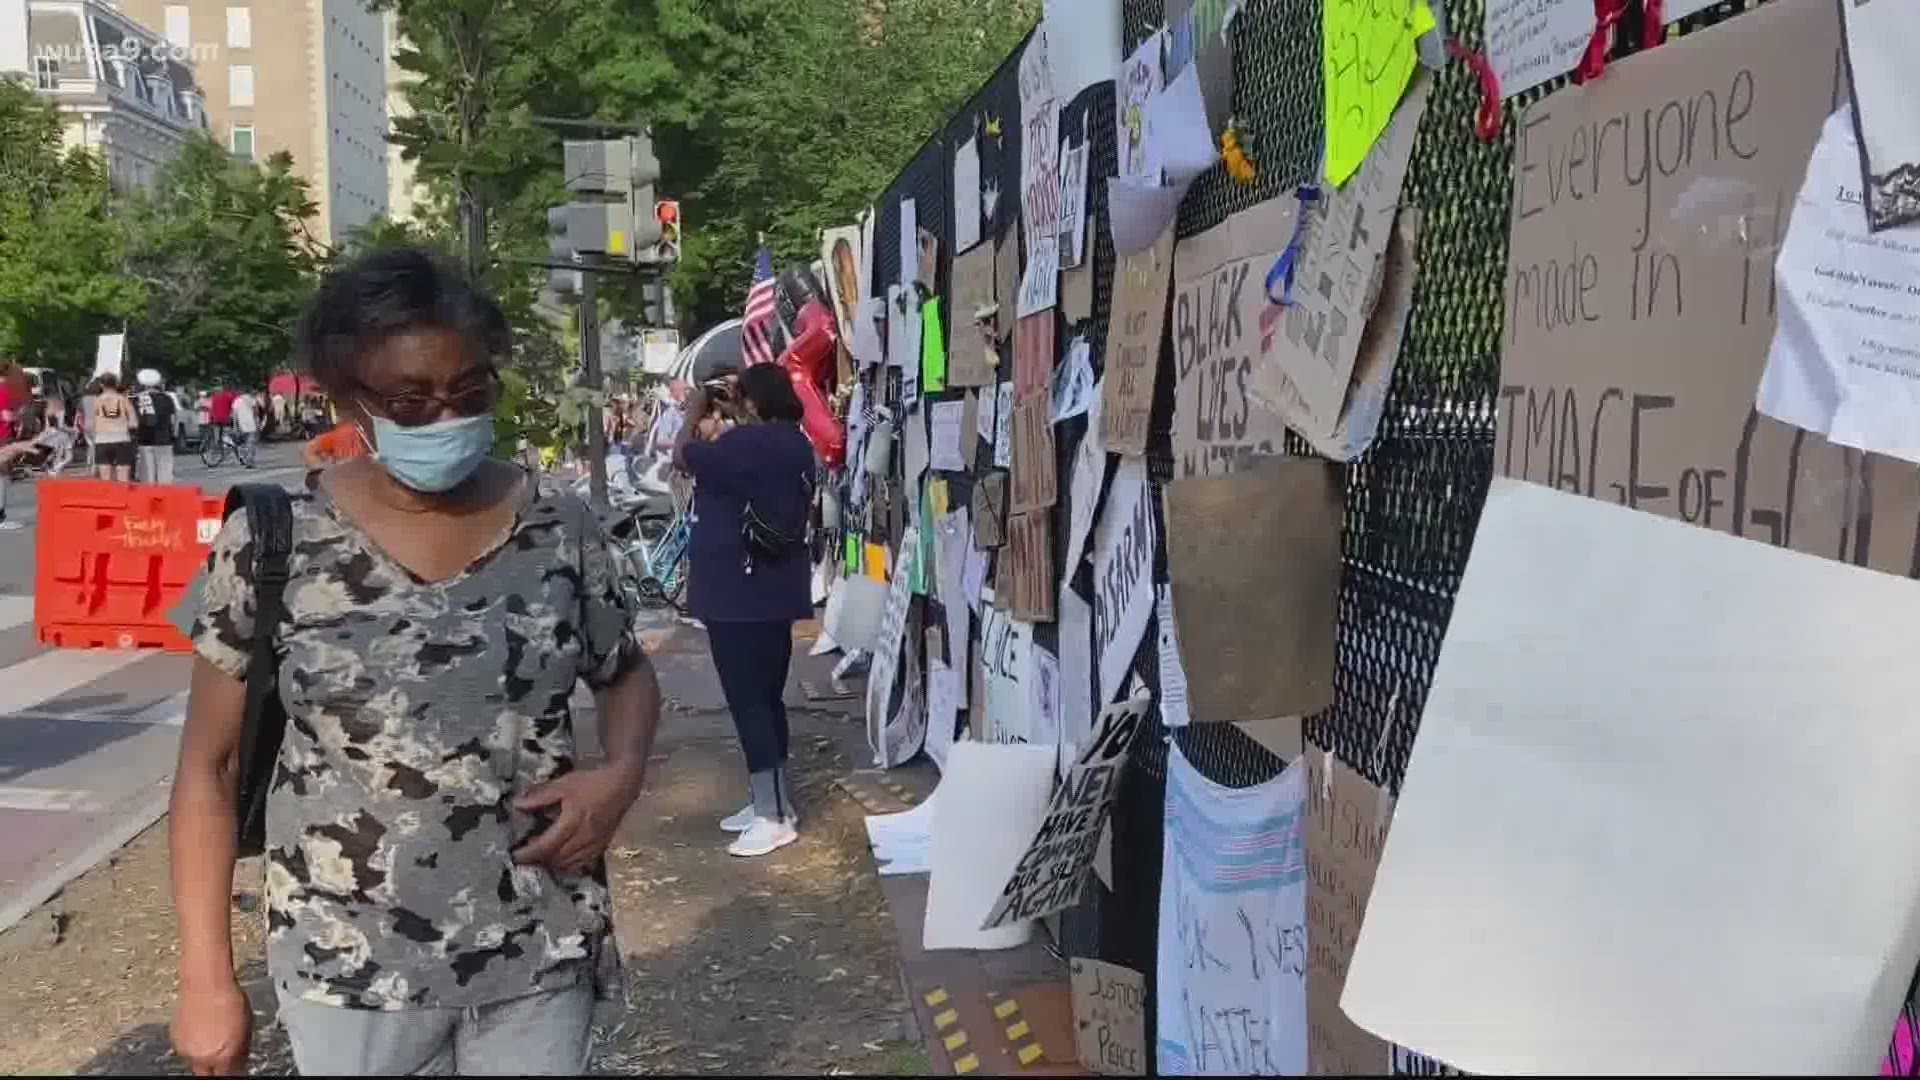 The temporary fence erected last week to keep protesters out of Lafayette Square is now covered with carefully crafted messages, honoring black lives.